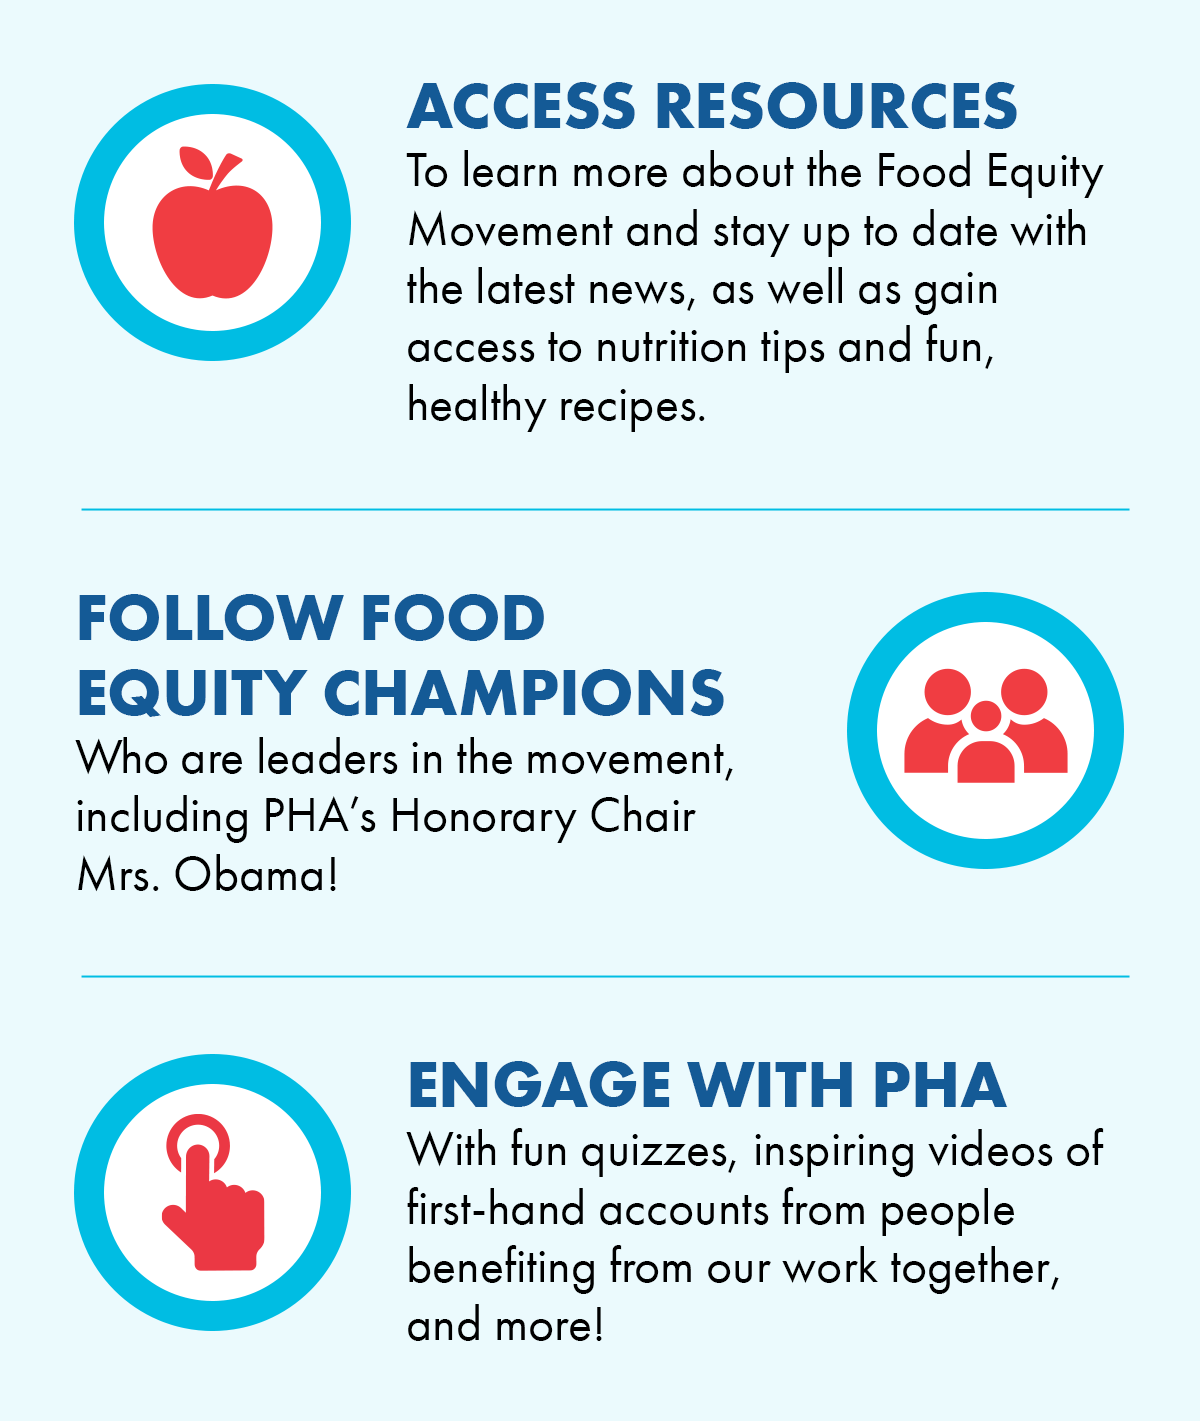 Access Resources - to learn more about the Food Equity Movement and stay up to date with the latest news, as well as goain access to nutrition tips and fun, healthy recipes. Follow Food Equity Champions - who are leaders in the movement, including PHA's Honarary Chair Mrs. Obama! Engage with PHA - with fun quizzes, inspiring videos of first-hand accounts from people benefitting from our work together and more!